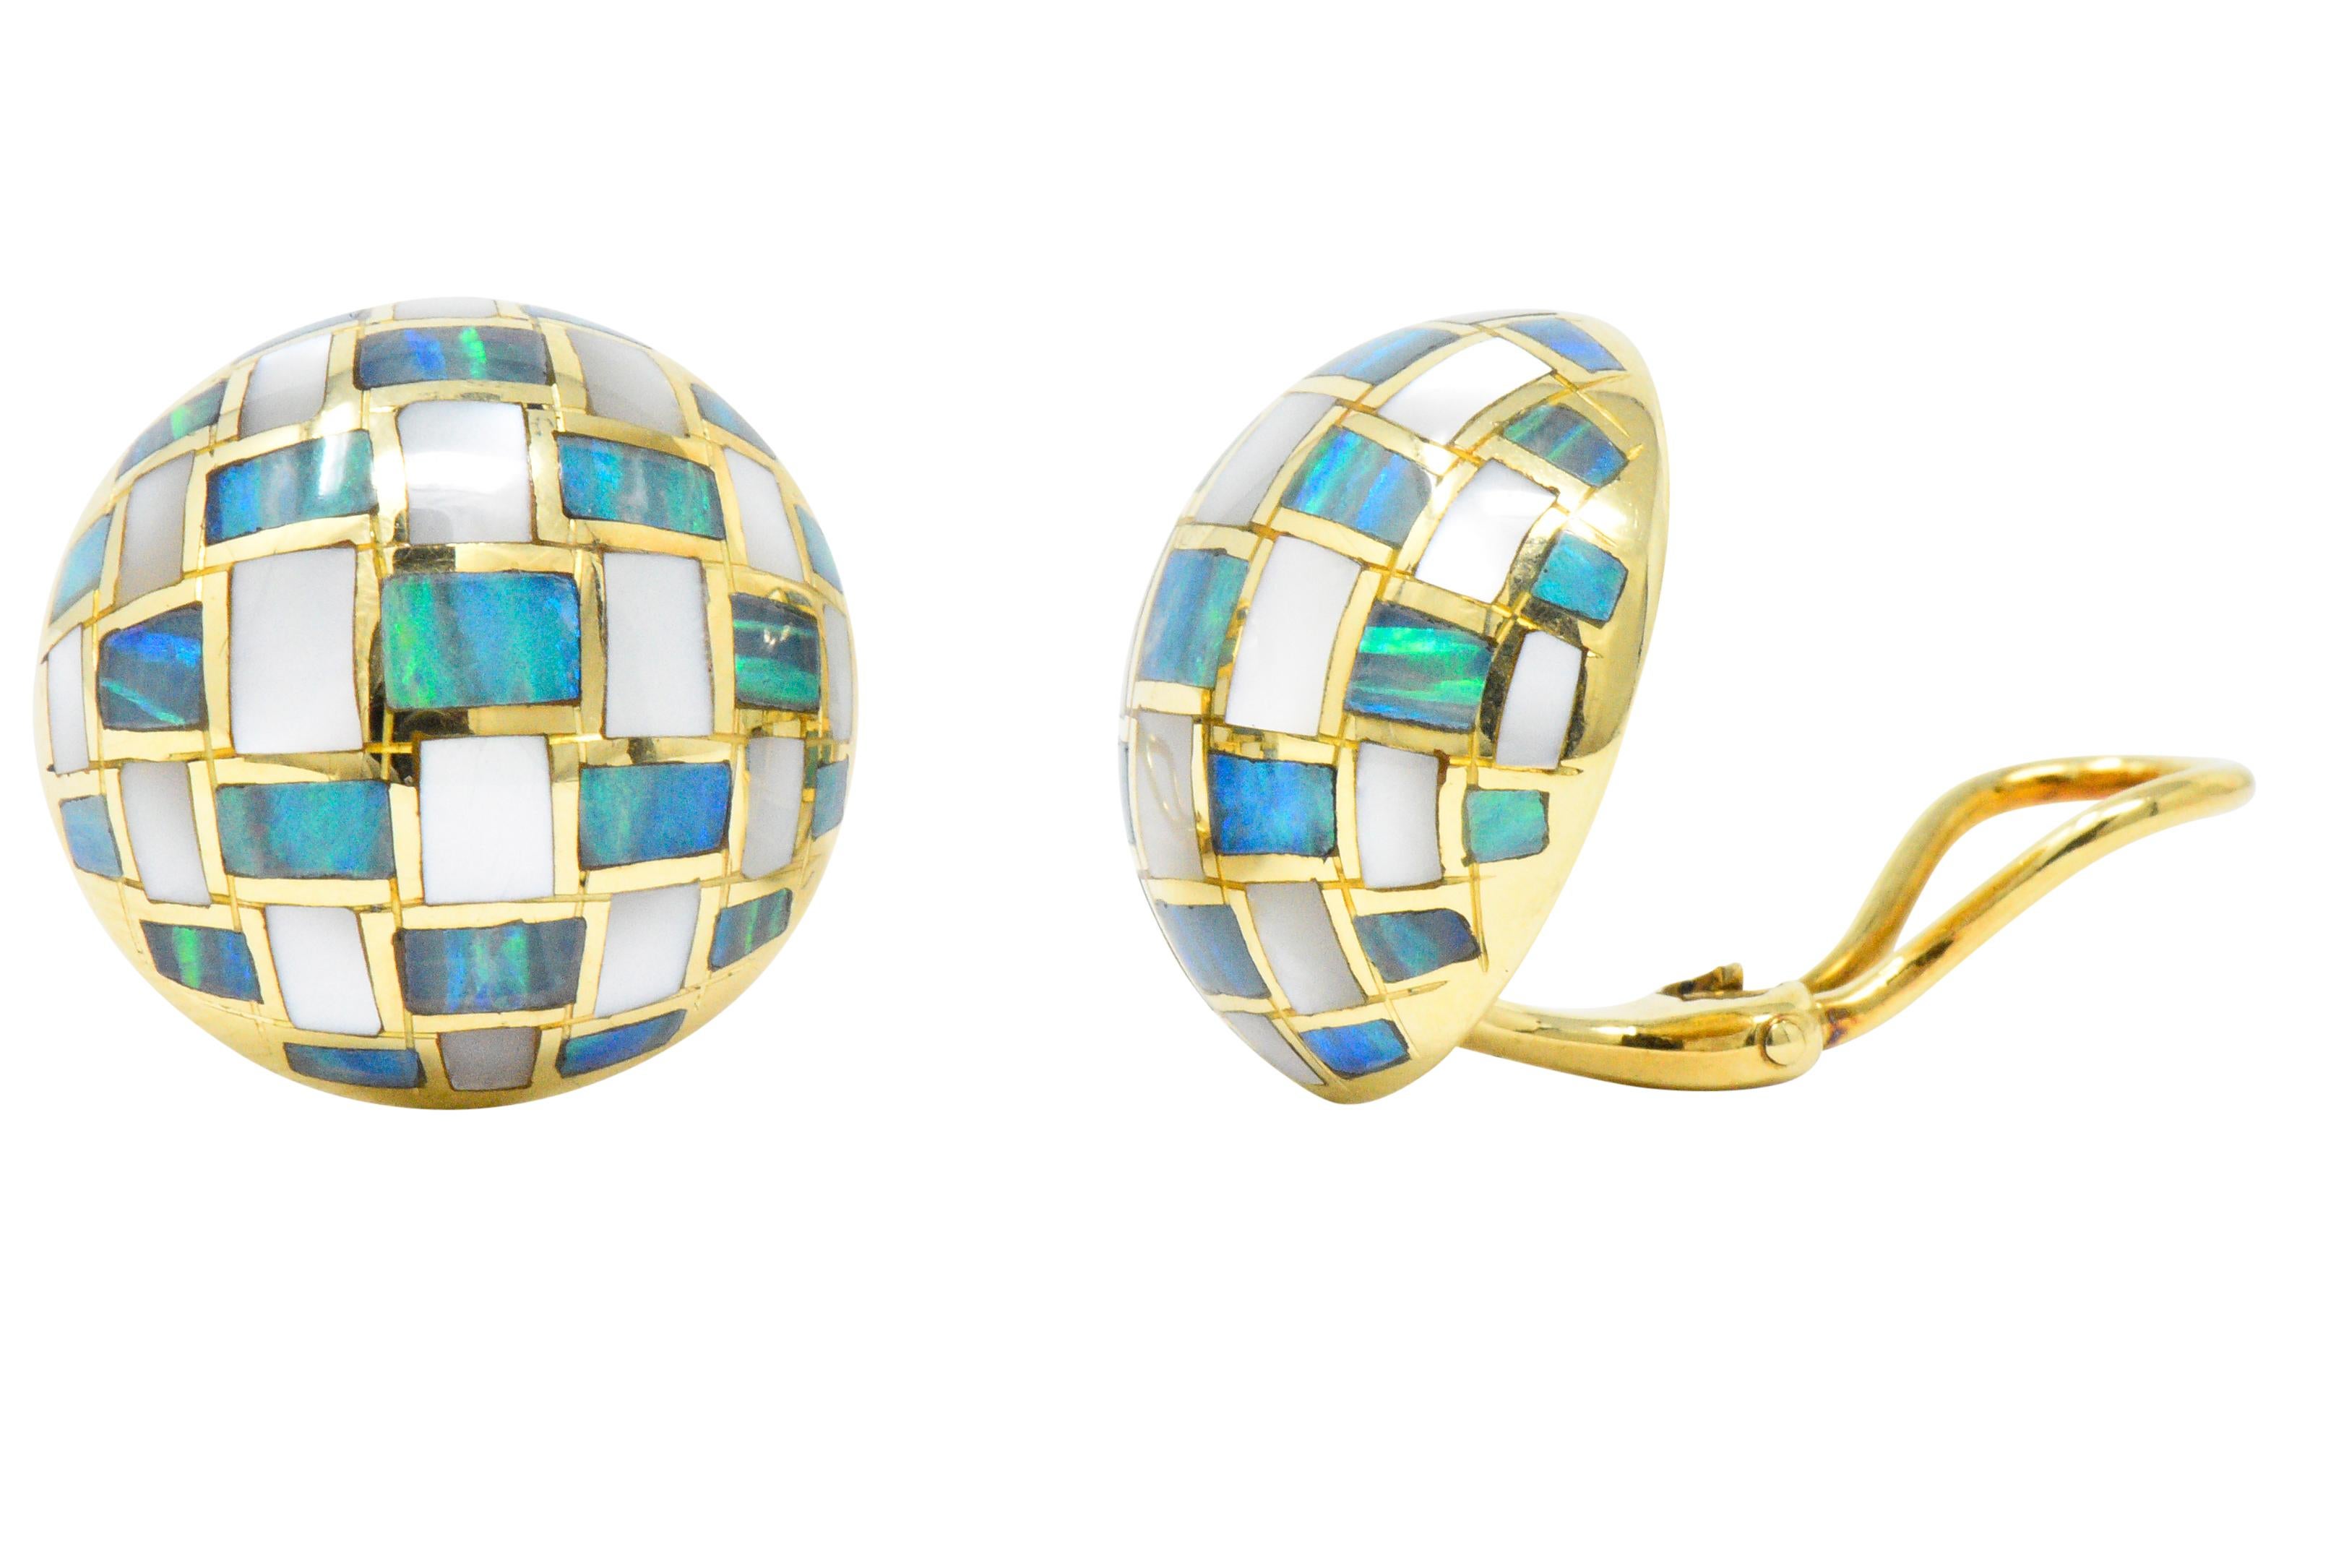 Round domes with inlayed mother of pearl and black opal

Abstract checkerboard motif

Hinged omega backs

Signed T&Co

Circa 1970's

Tested as 18 karat gold

Diameter: 19.7 mm

Total Weight: 13.5 Grams

Chic. Sophisticated. Classy.
 

 

Stock